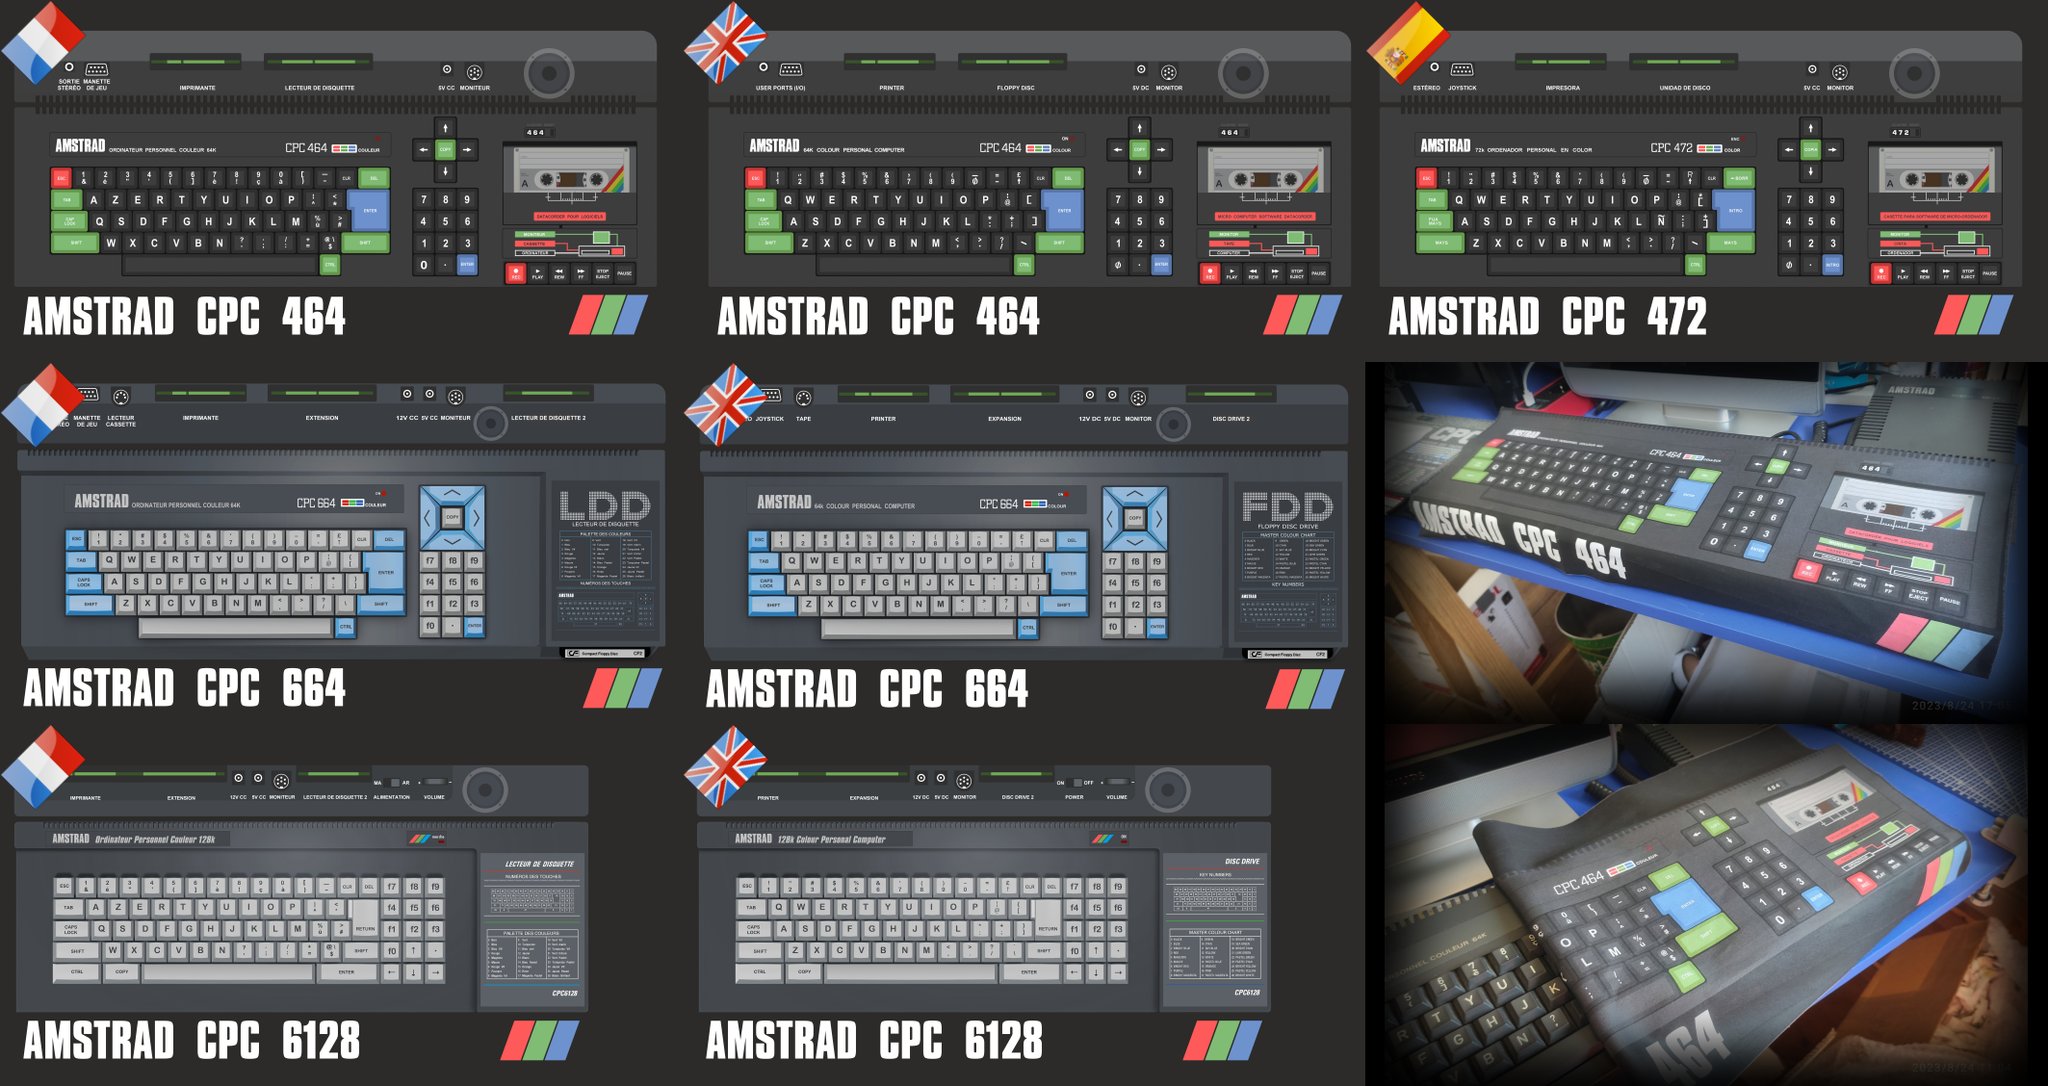 Dust-free protection for your Amstrad CPC by Frédéric BELLEC (ACME)